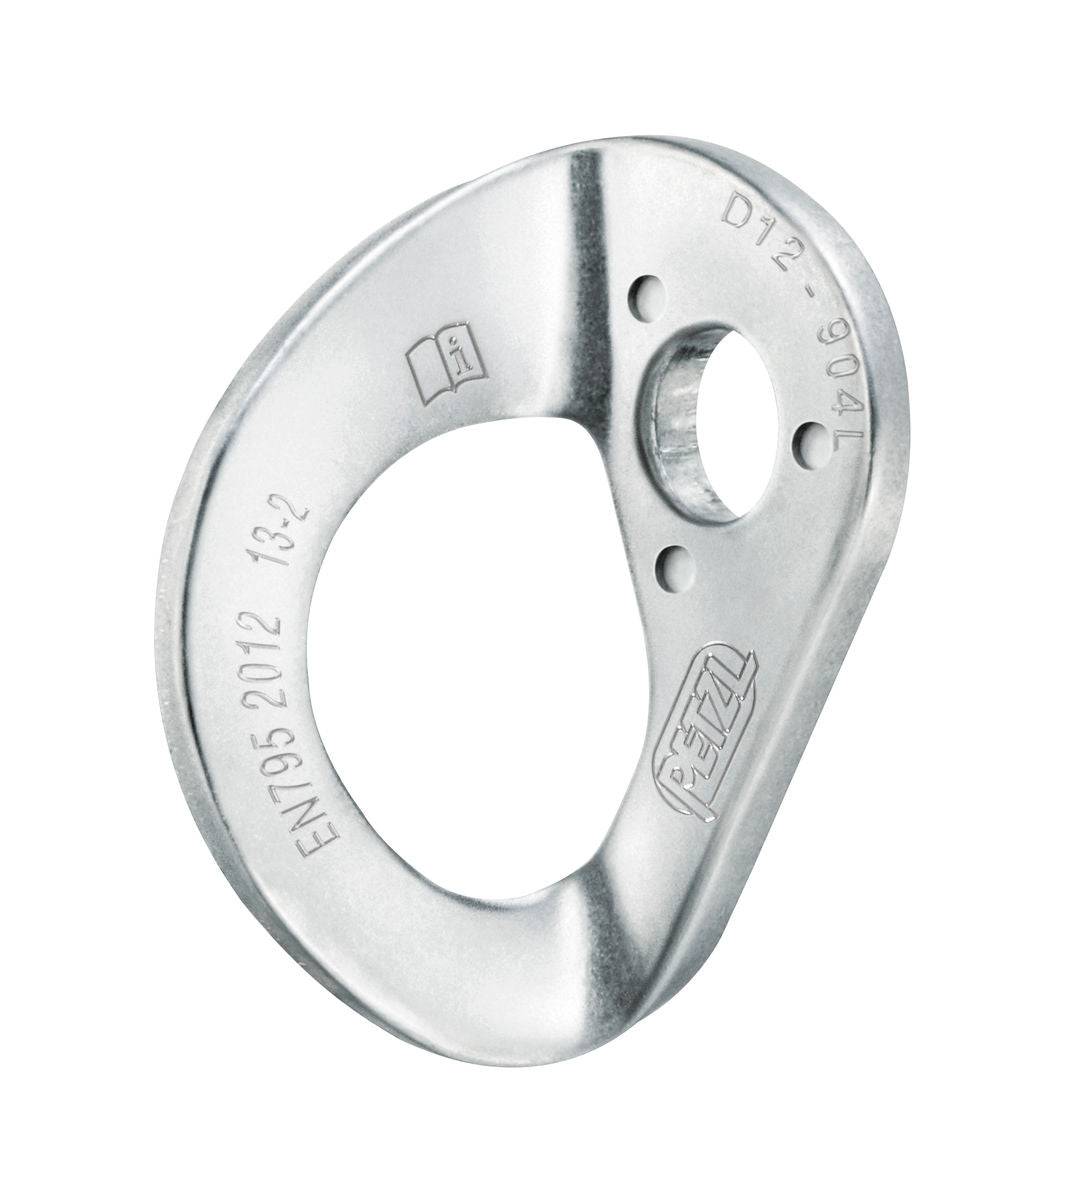 Petzl COEUR HCR 12mm Stainless Steel Bolt Hanger for Ultra Corrosive Environments (Pack of 20) P36AH 12 - SecureHeights